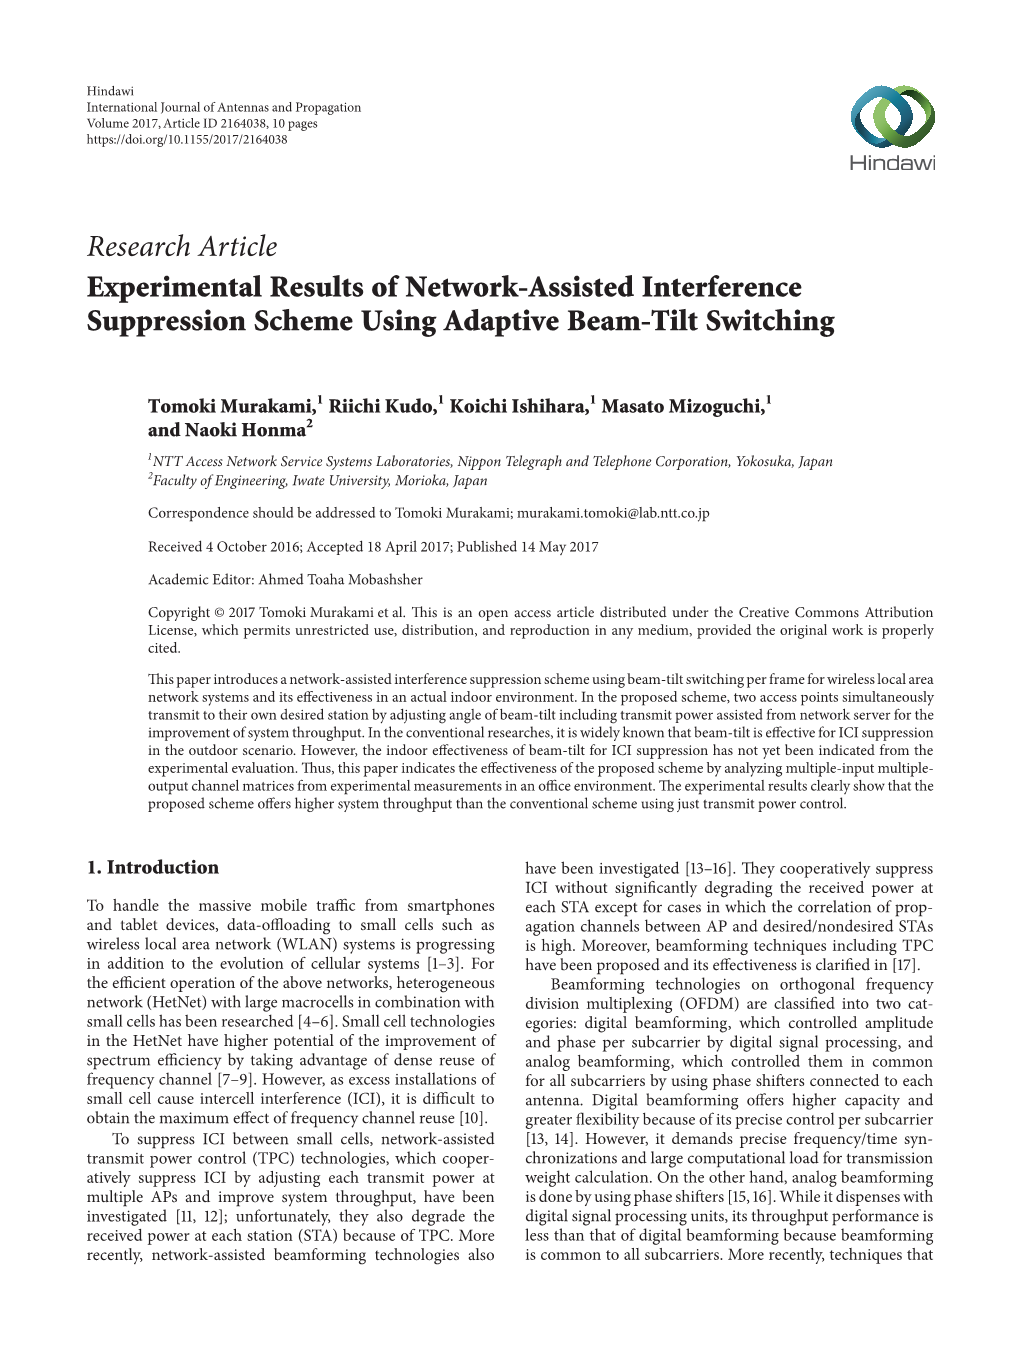 Experimental Results of Network-Assisted Interference Suppression Scheme Using Adaptive Beam-Tilt Switching